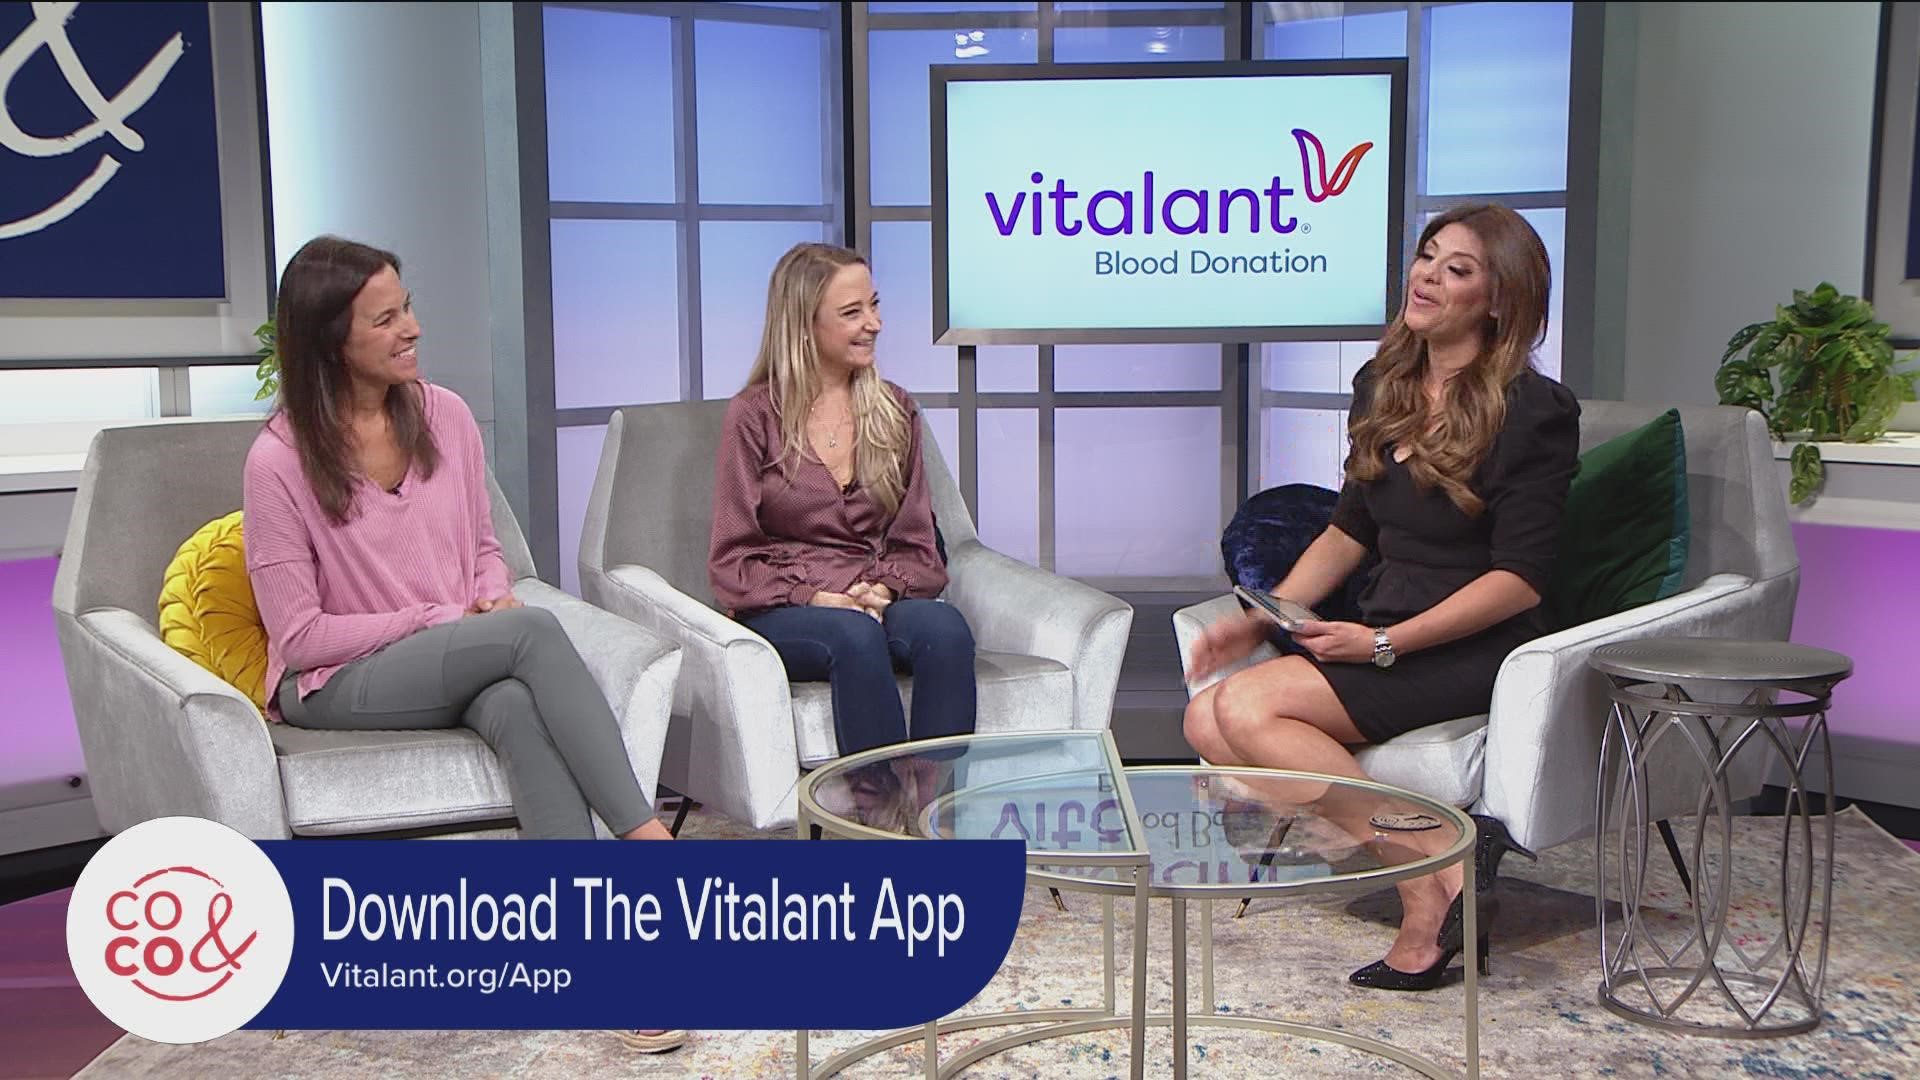 Download the new Vitalant app and schedule your next appointment in May--you could win a $500 prepaid gift card! Learn more at Vitalant.org/App.